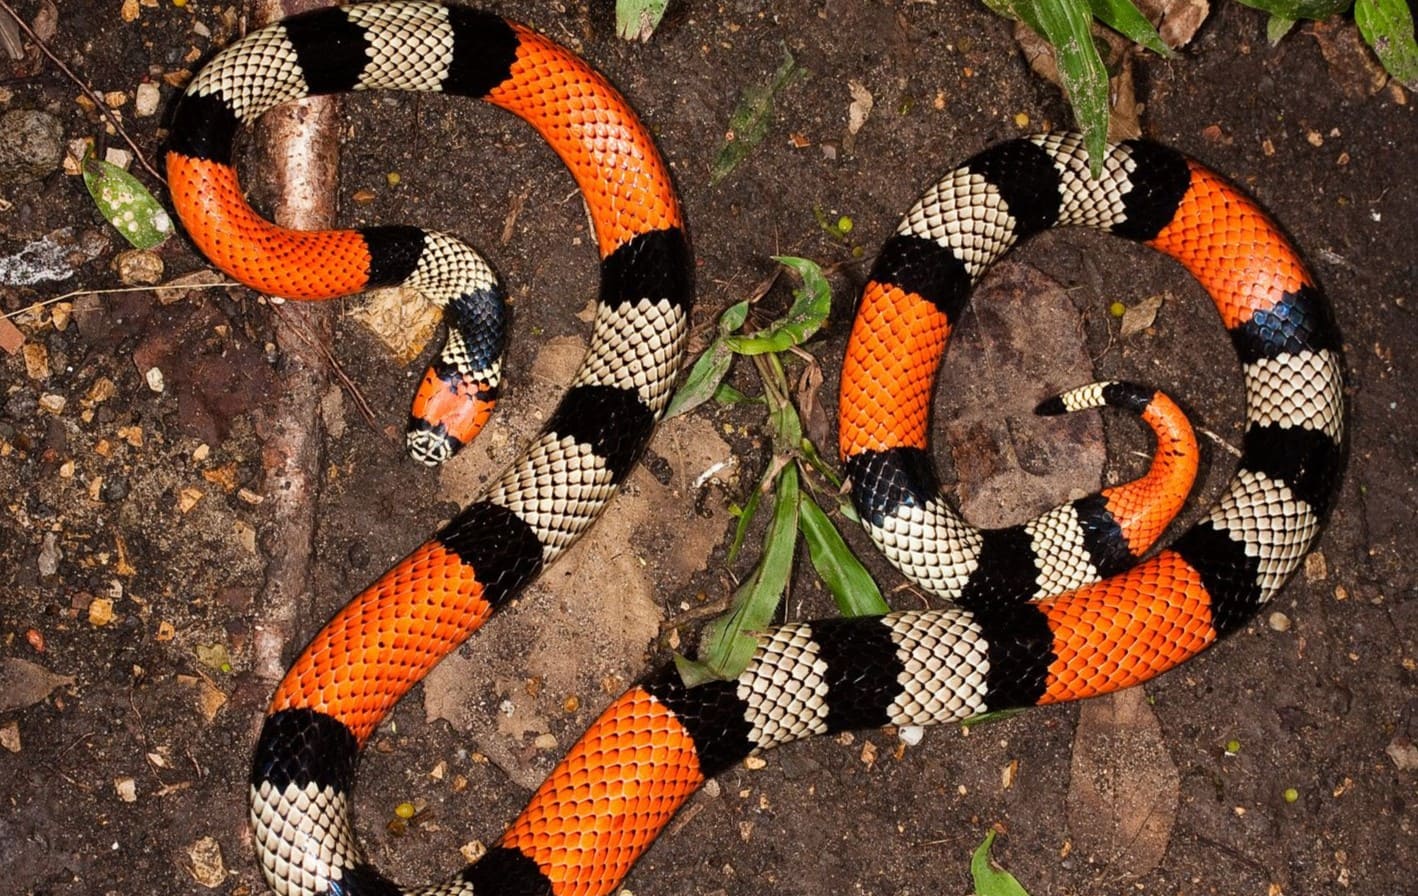 Coral snake, Diet, Size, Rhyme, & Facts